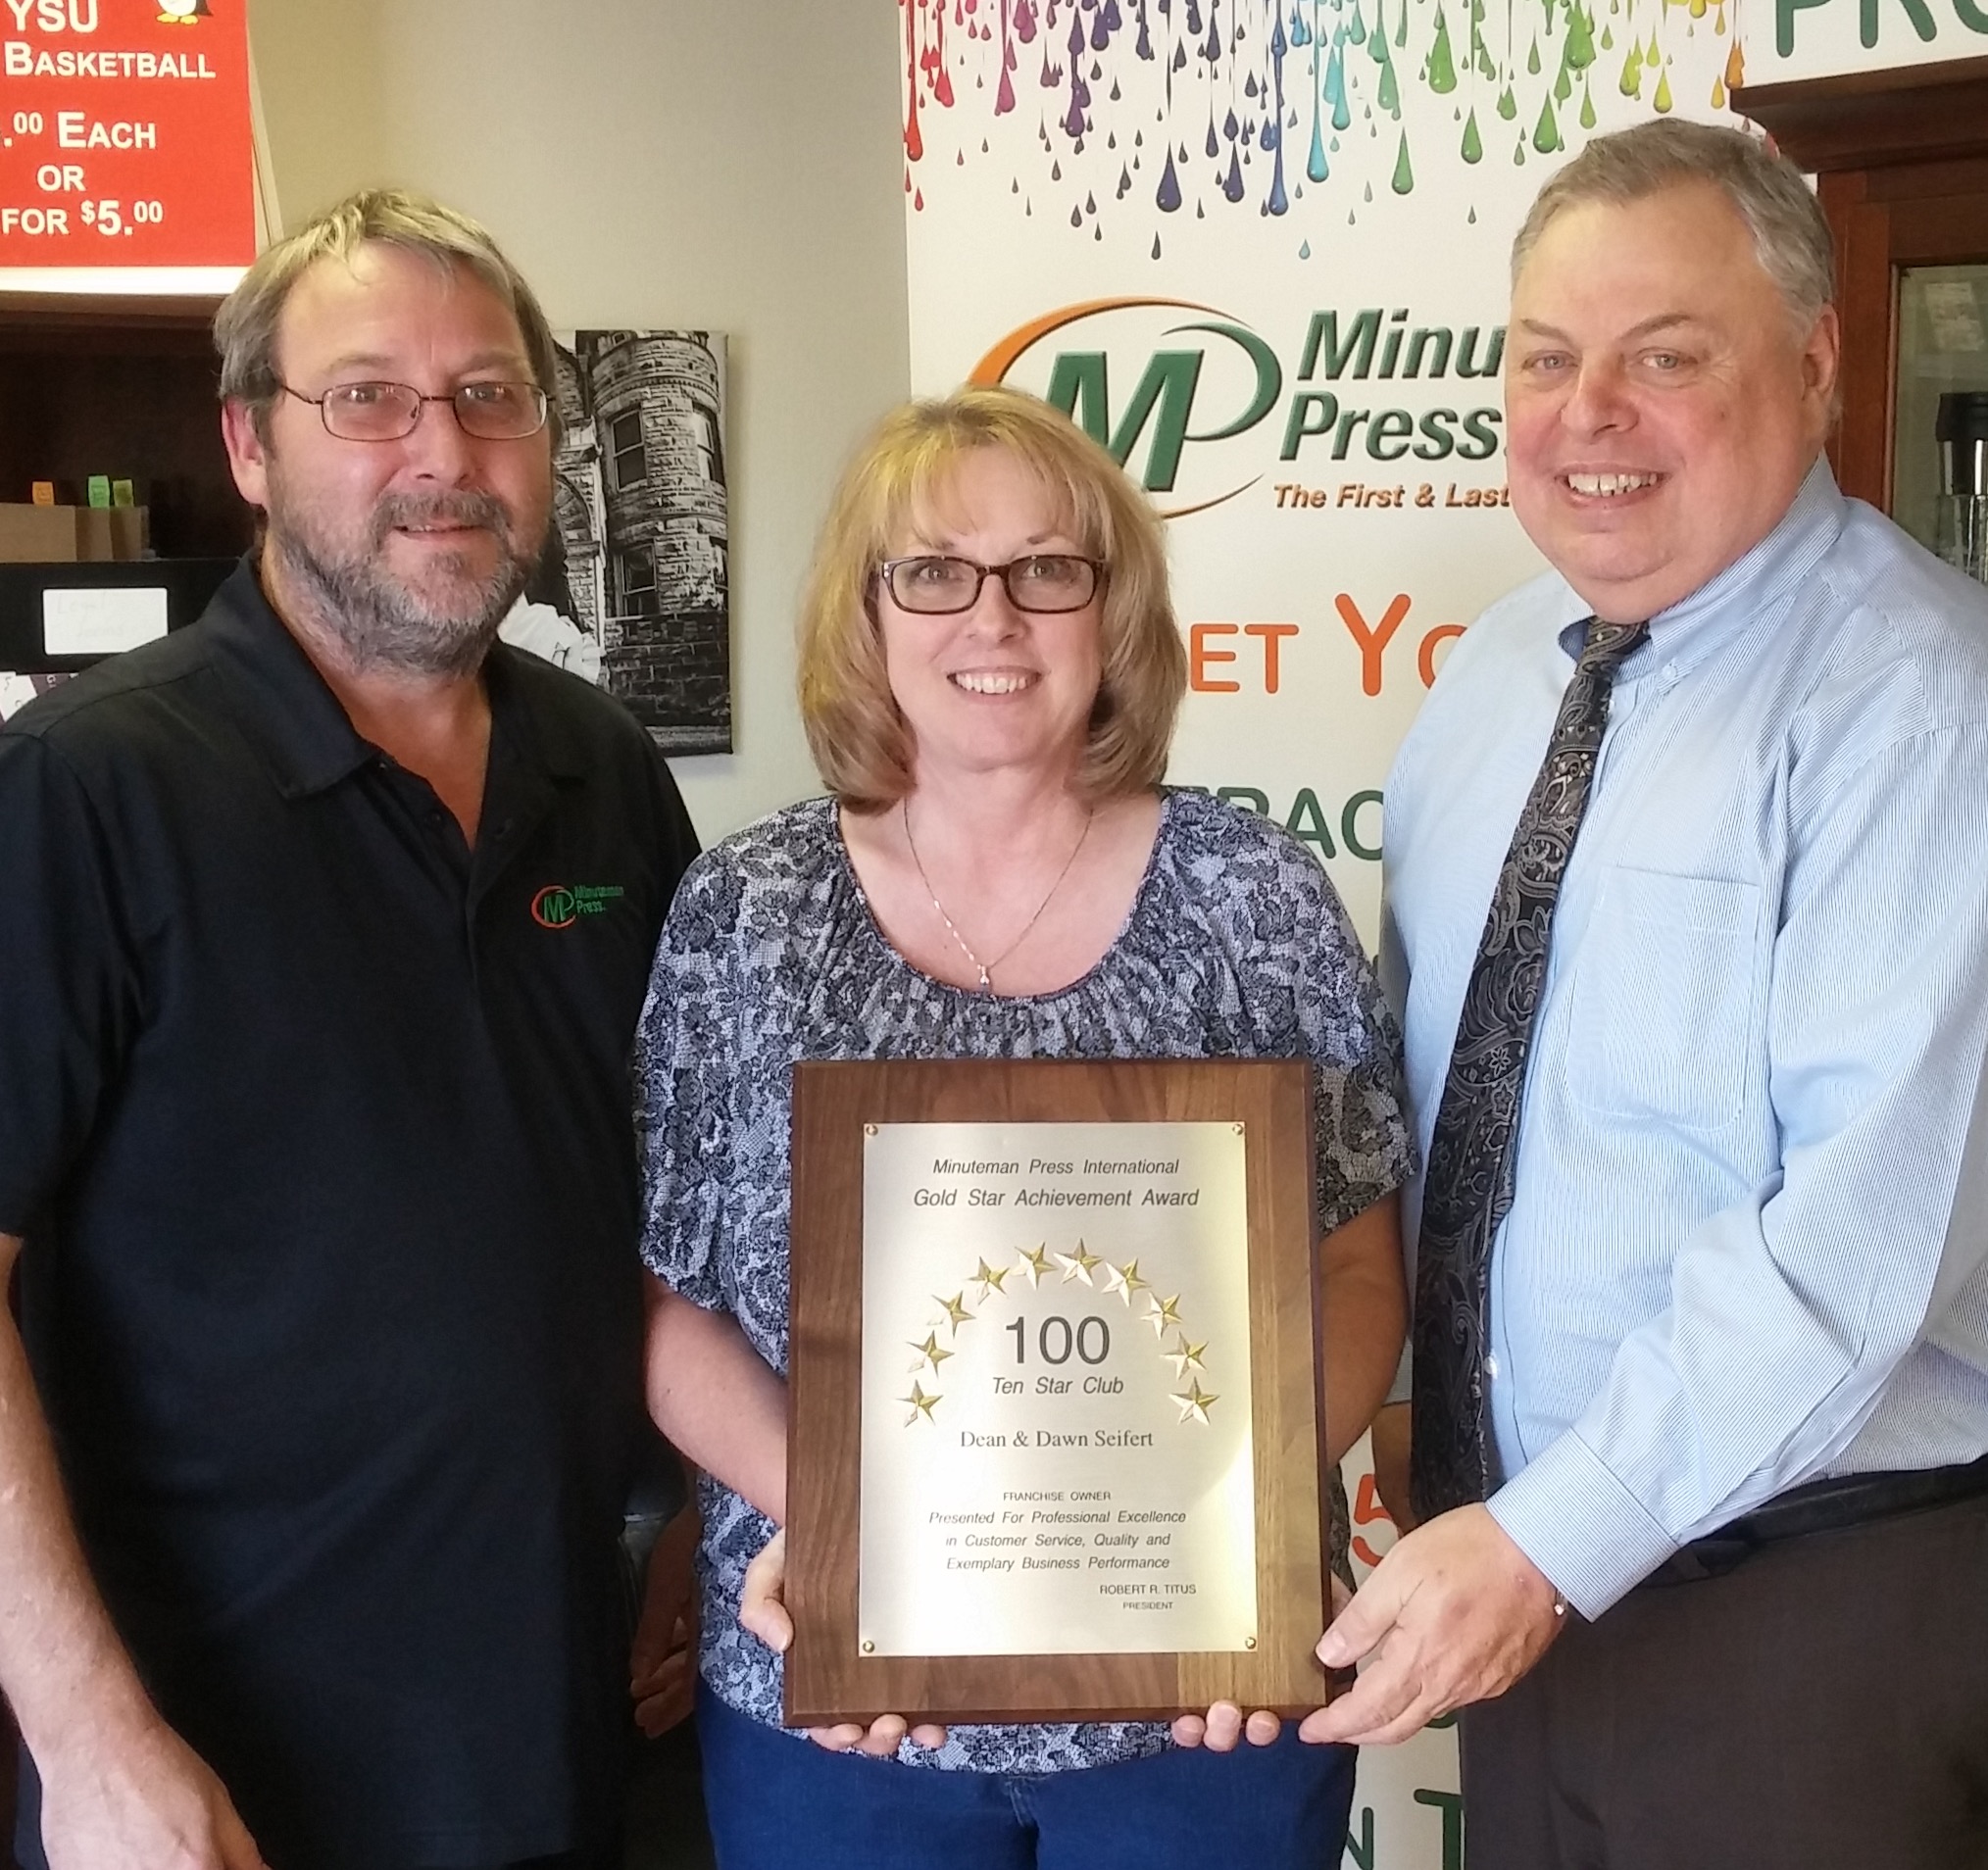 Youngstown, Ohio Minuteman Press franchise owners Dean Seifert (left) and Dawn Seifert (center), along with Gary Nowak (right), Minuteman Press International Regional Vice President for the Ohio region